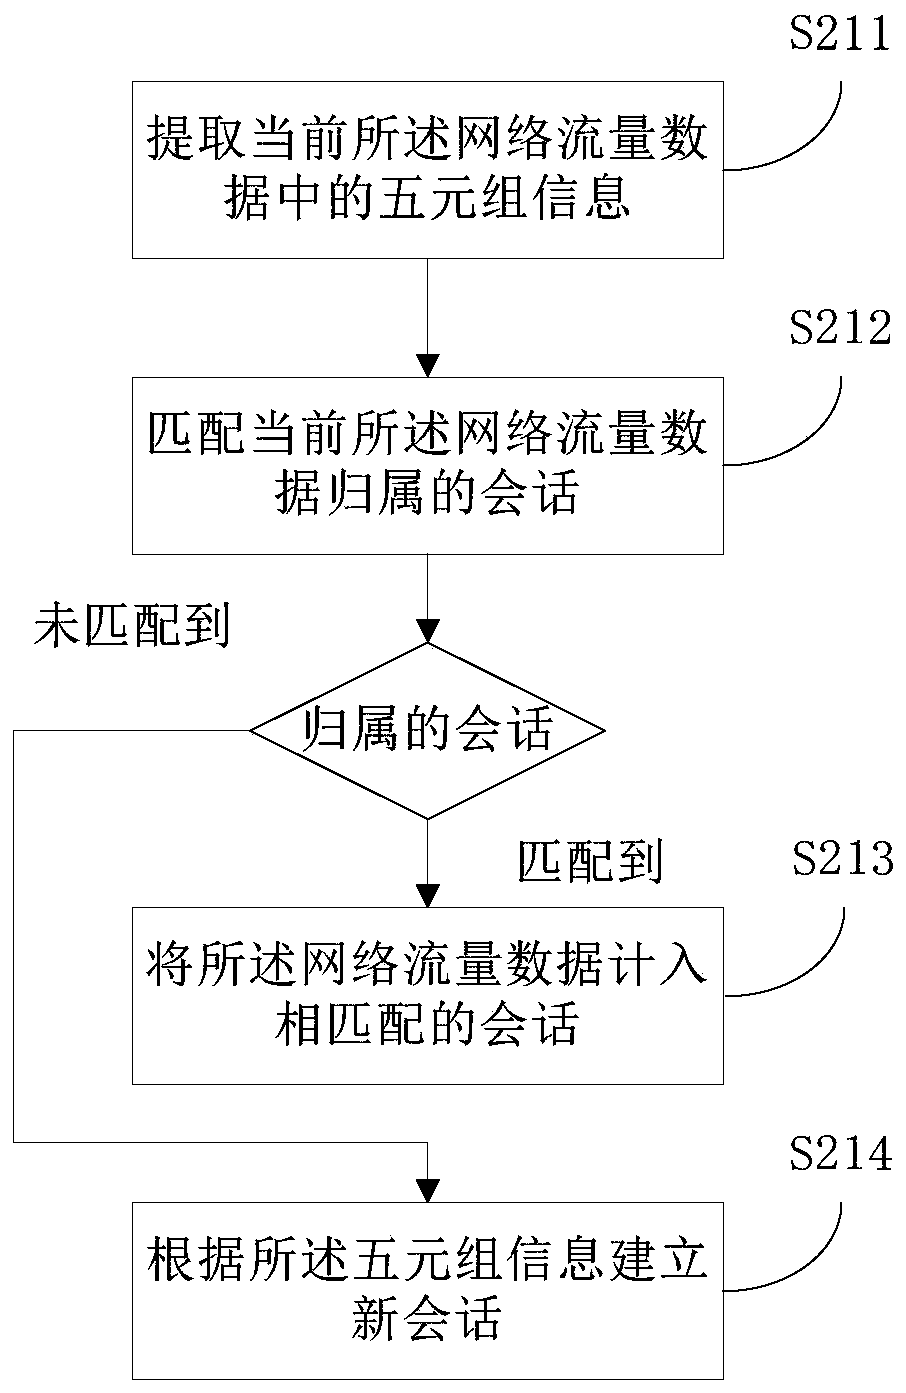 Malicious encrypted traffic detection method and system based on behavior analysis